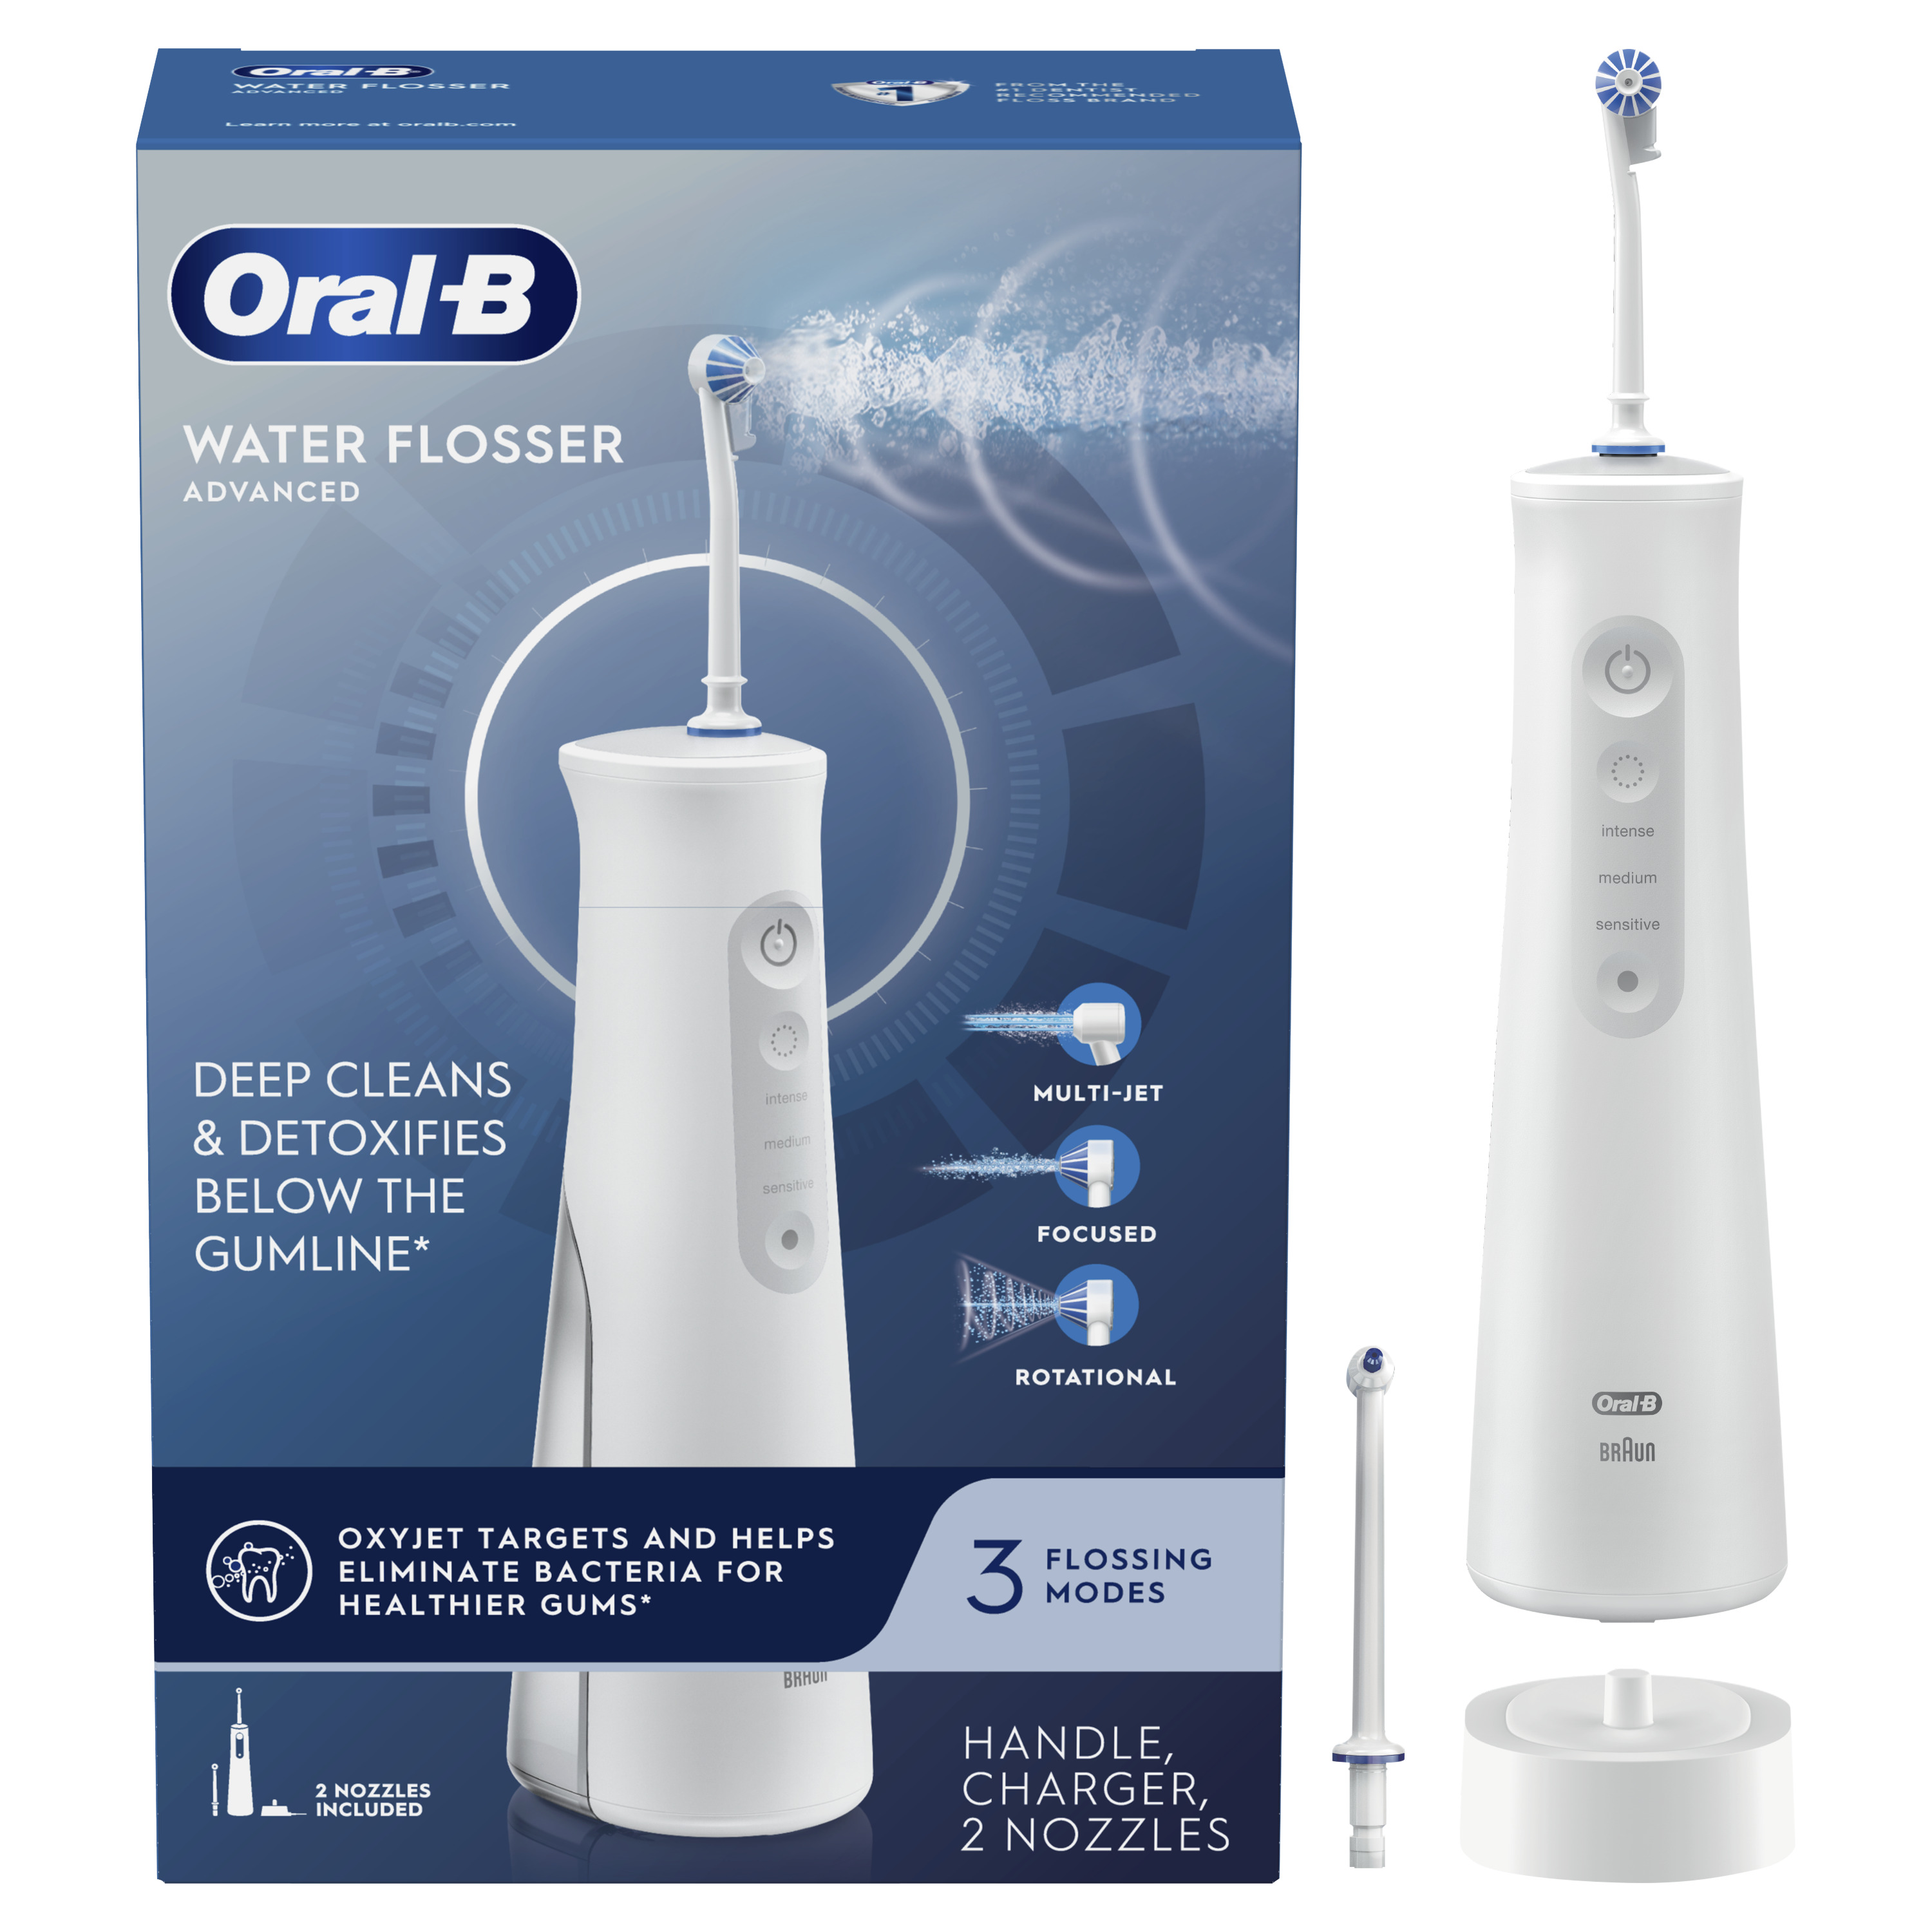 Oral-B Water Flosser Advanced, Portable Oral Irrigator Handle with 2 Nozzles, White - image 1 of 6